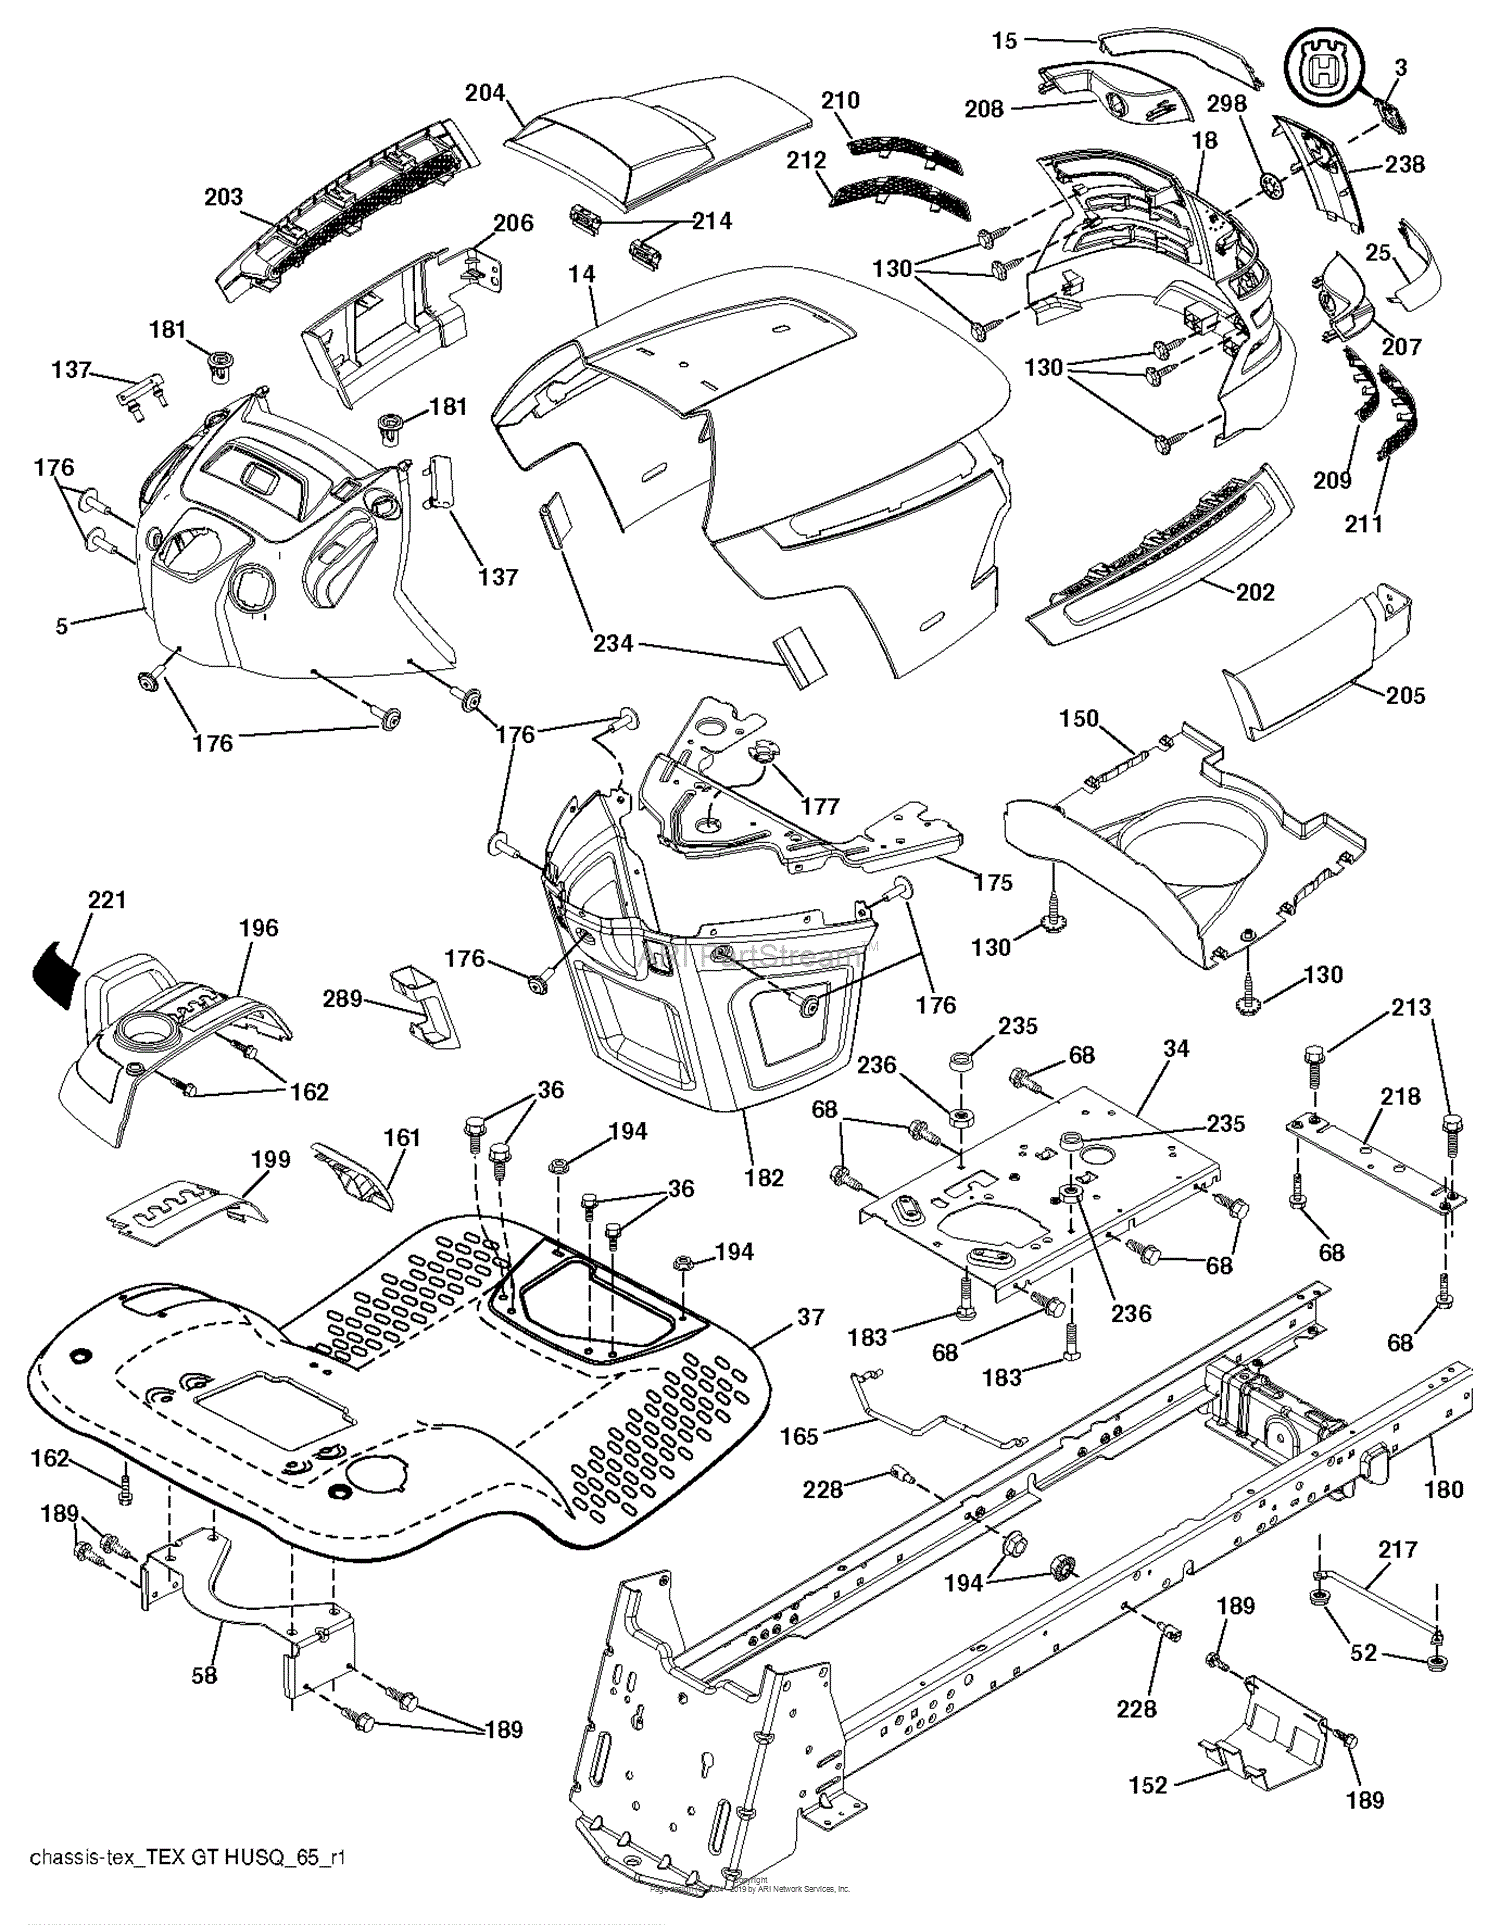 Husqvarna LGT2554 96045001504 (201202) Parts Diagram for CHASSIS